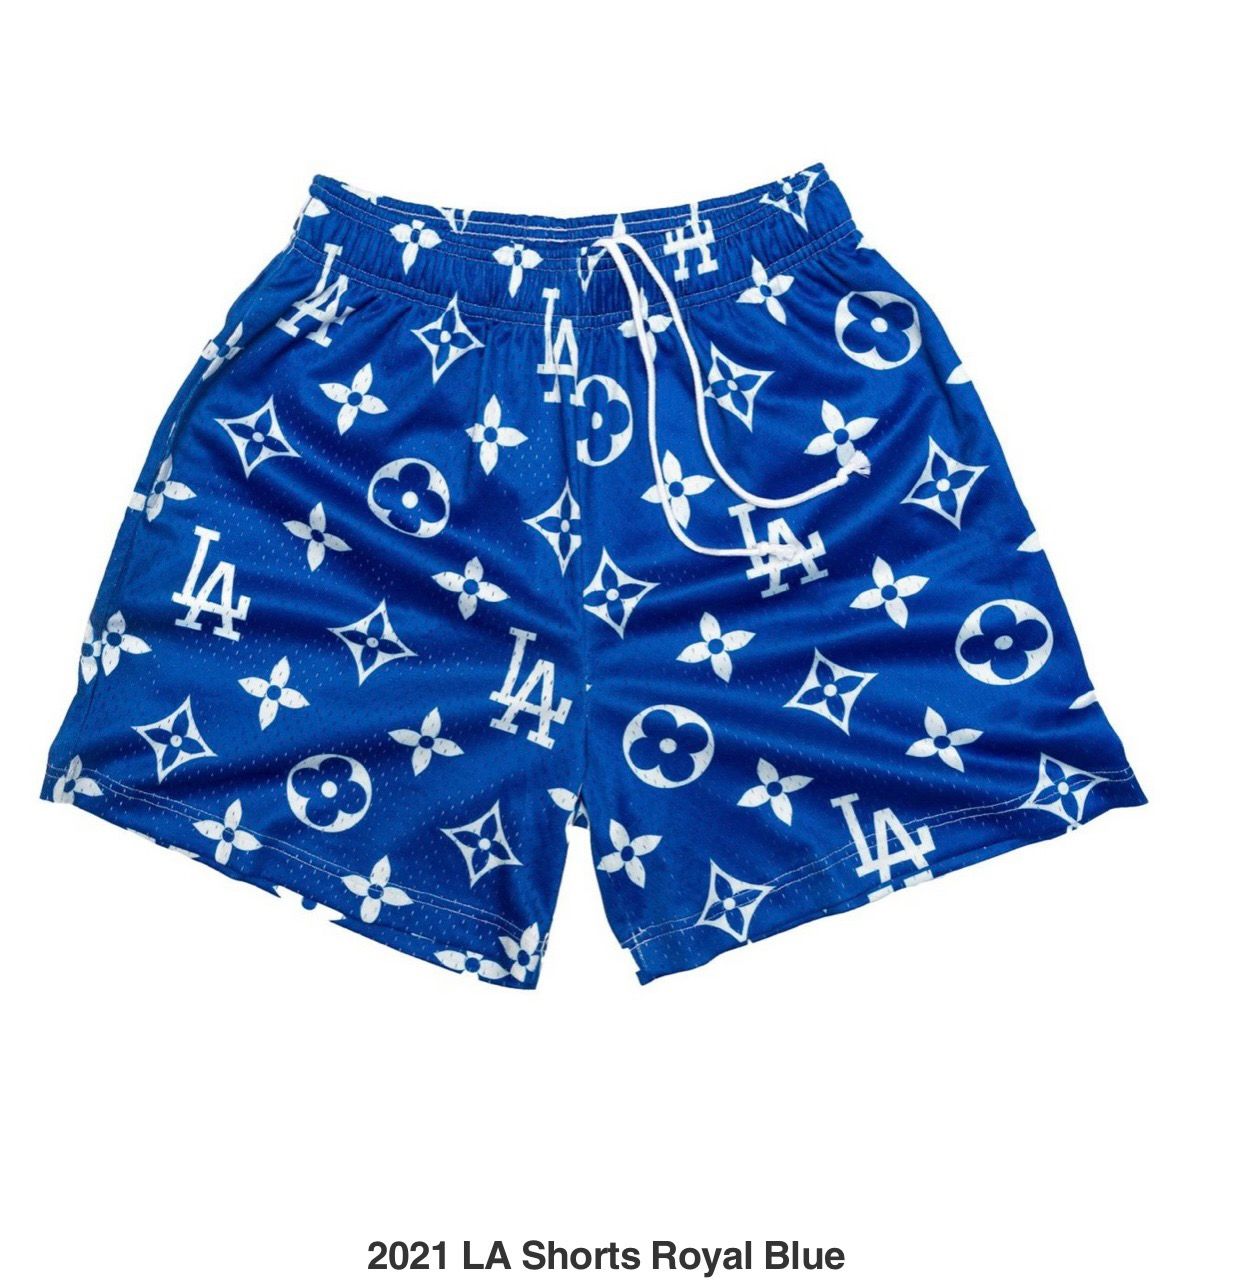 NEW FASHION] Louis Vuitton 3D Luxury All Over Print Shorts For Men